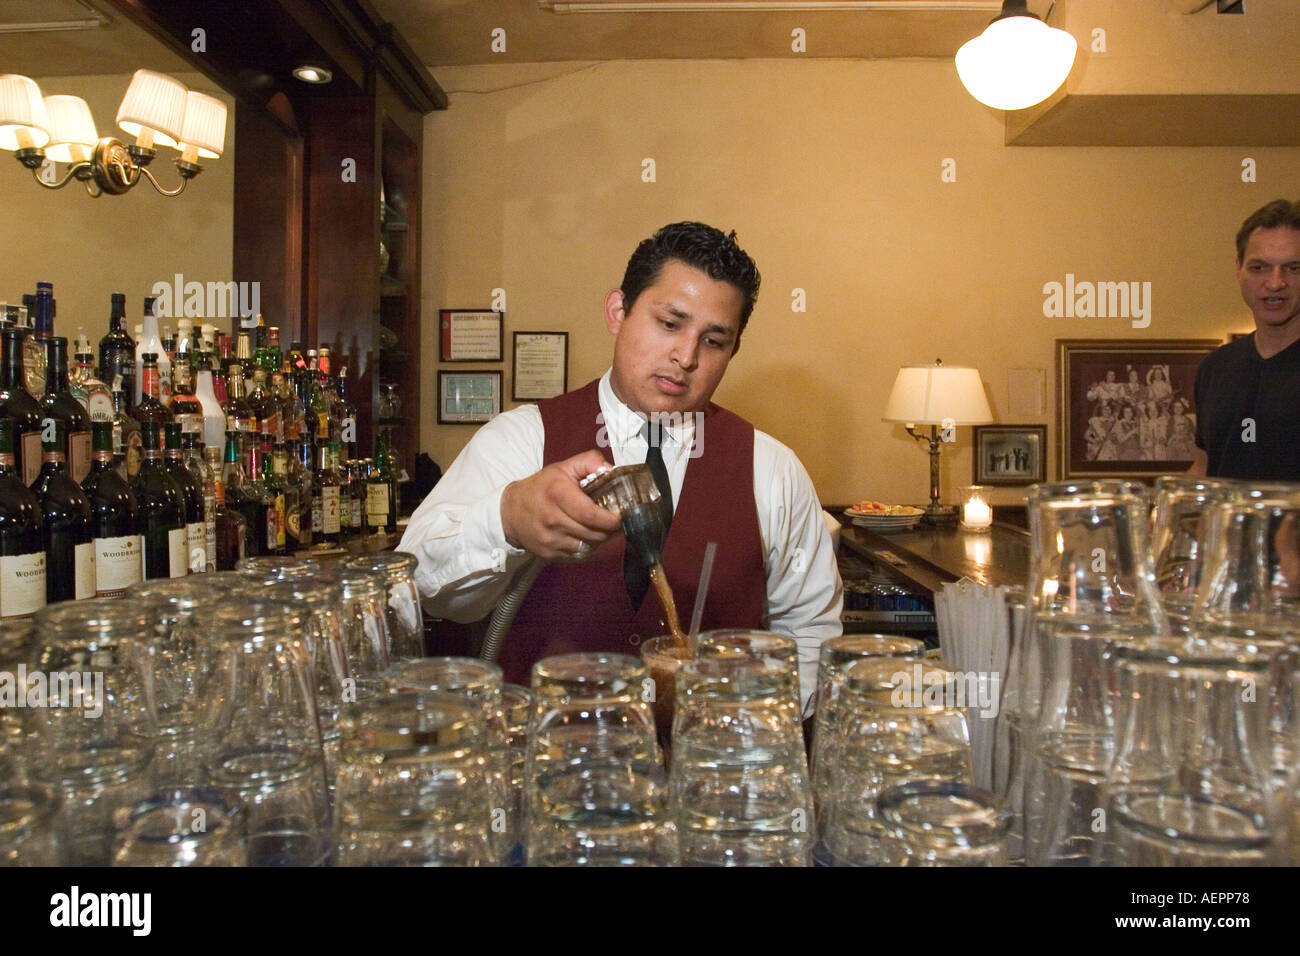 Chicago Illinois A bartender at Maggiano s restaurant Stock Photo